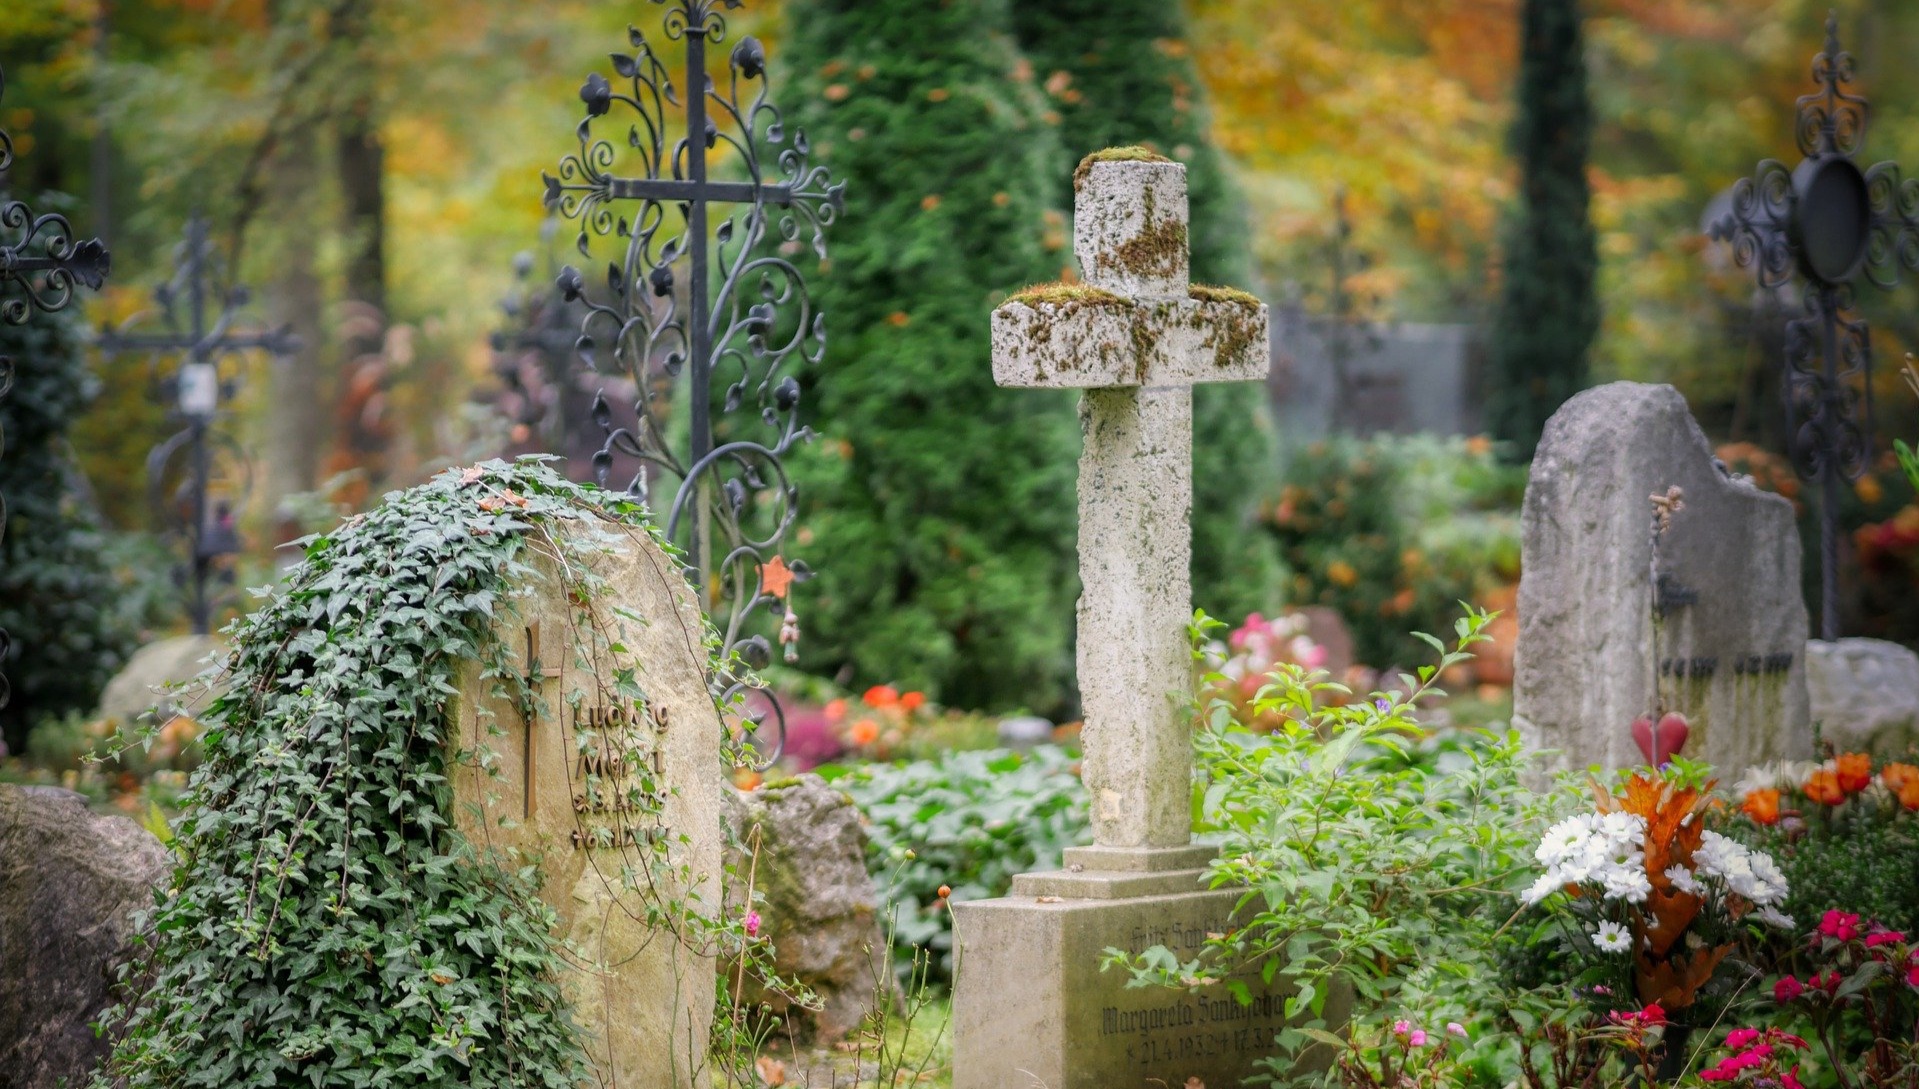 The mystery of All Souls' Day